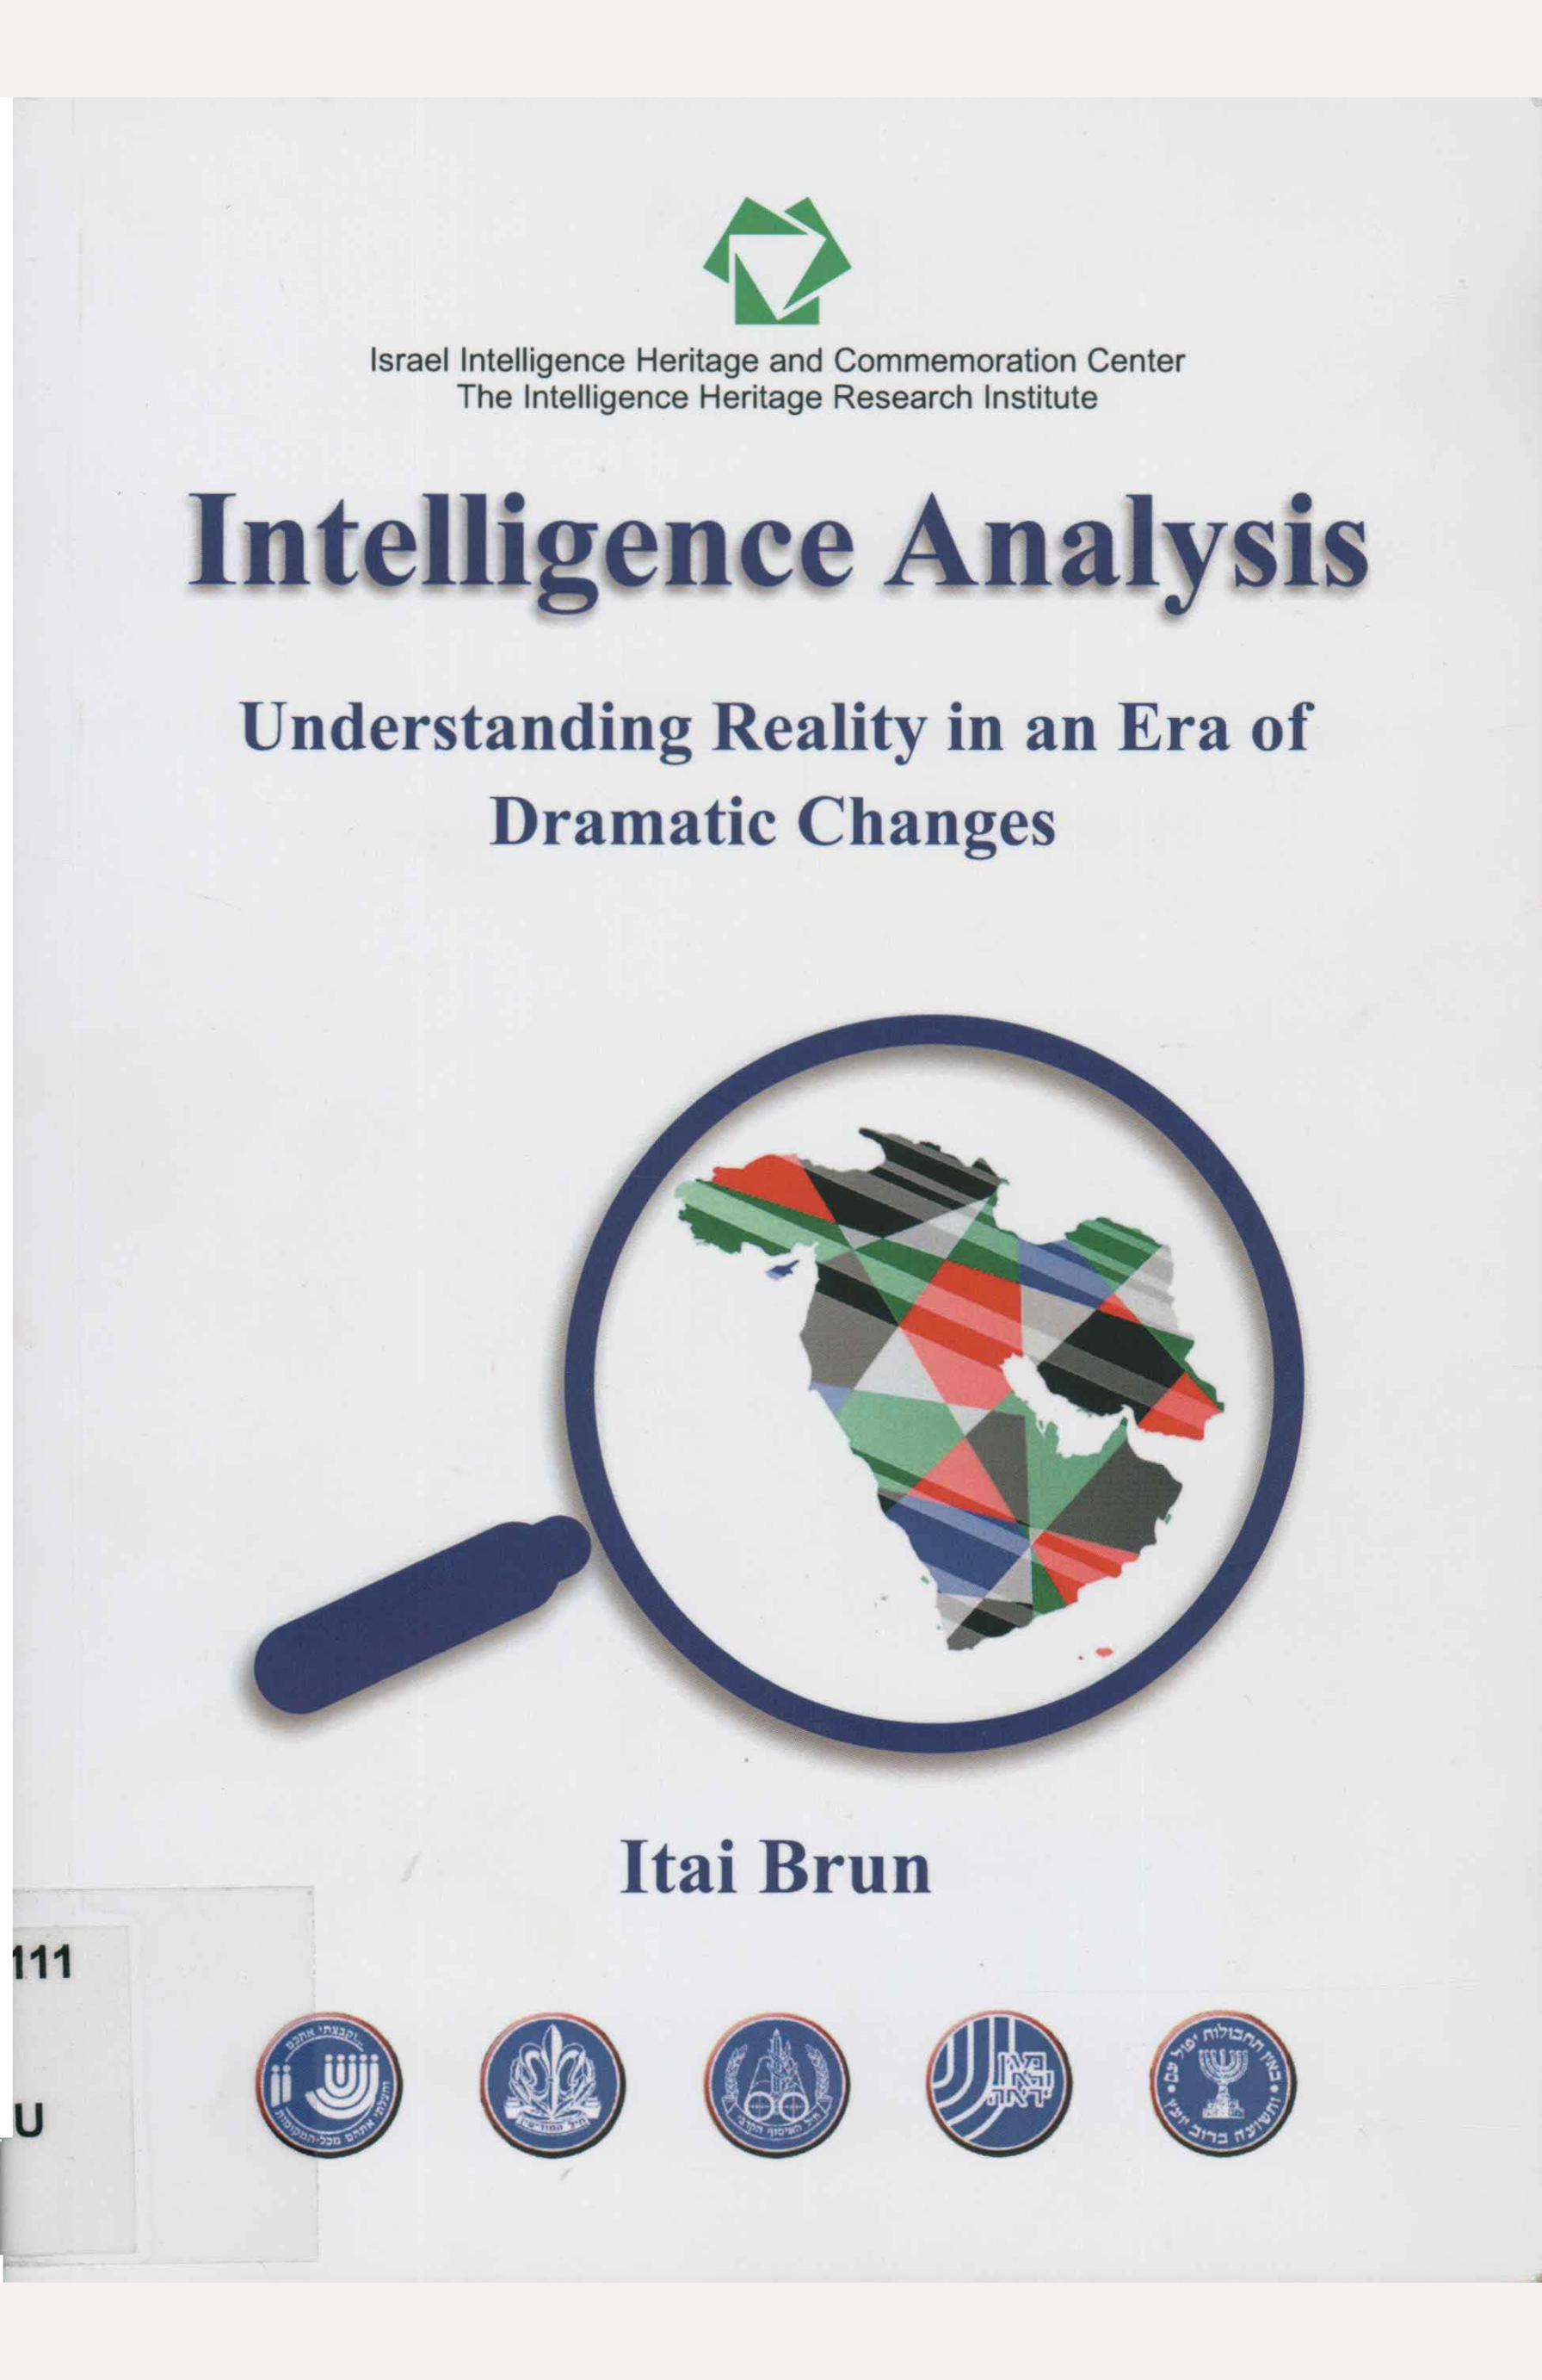 Intelligence Analysis: Understanding Reality in an Era of Dramatic Changes